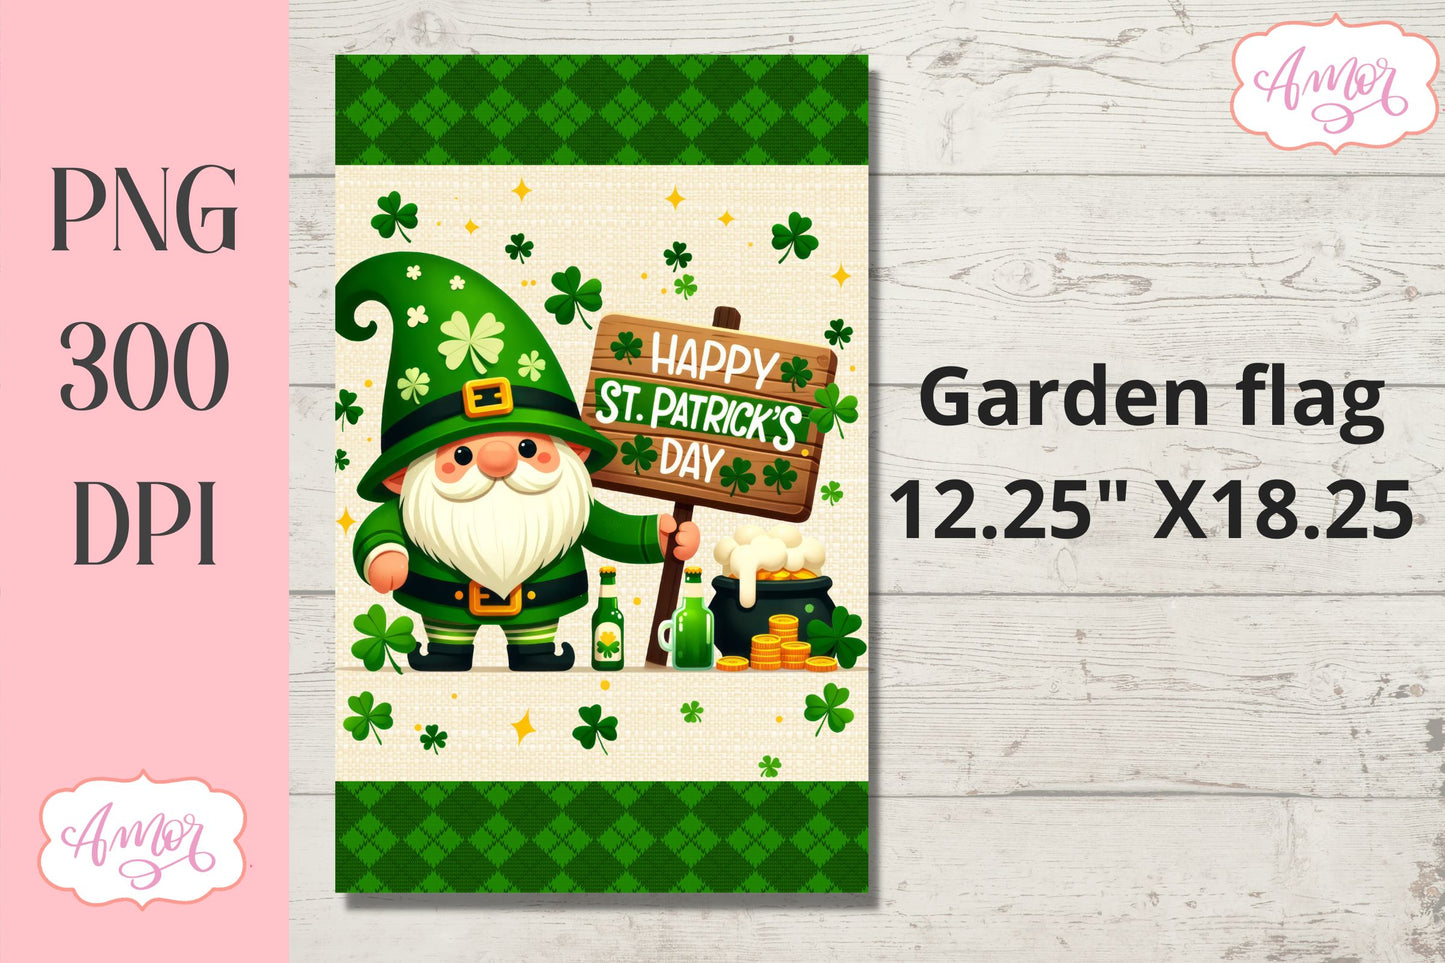 Happy St. Patrick's day garden flag PNG for sublimation